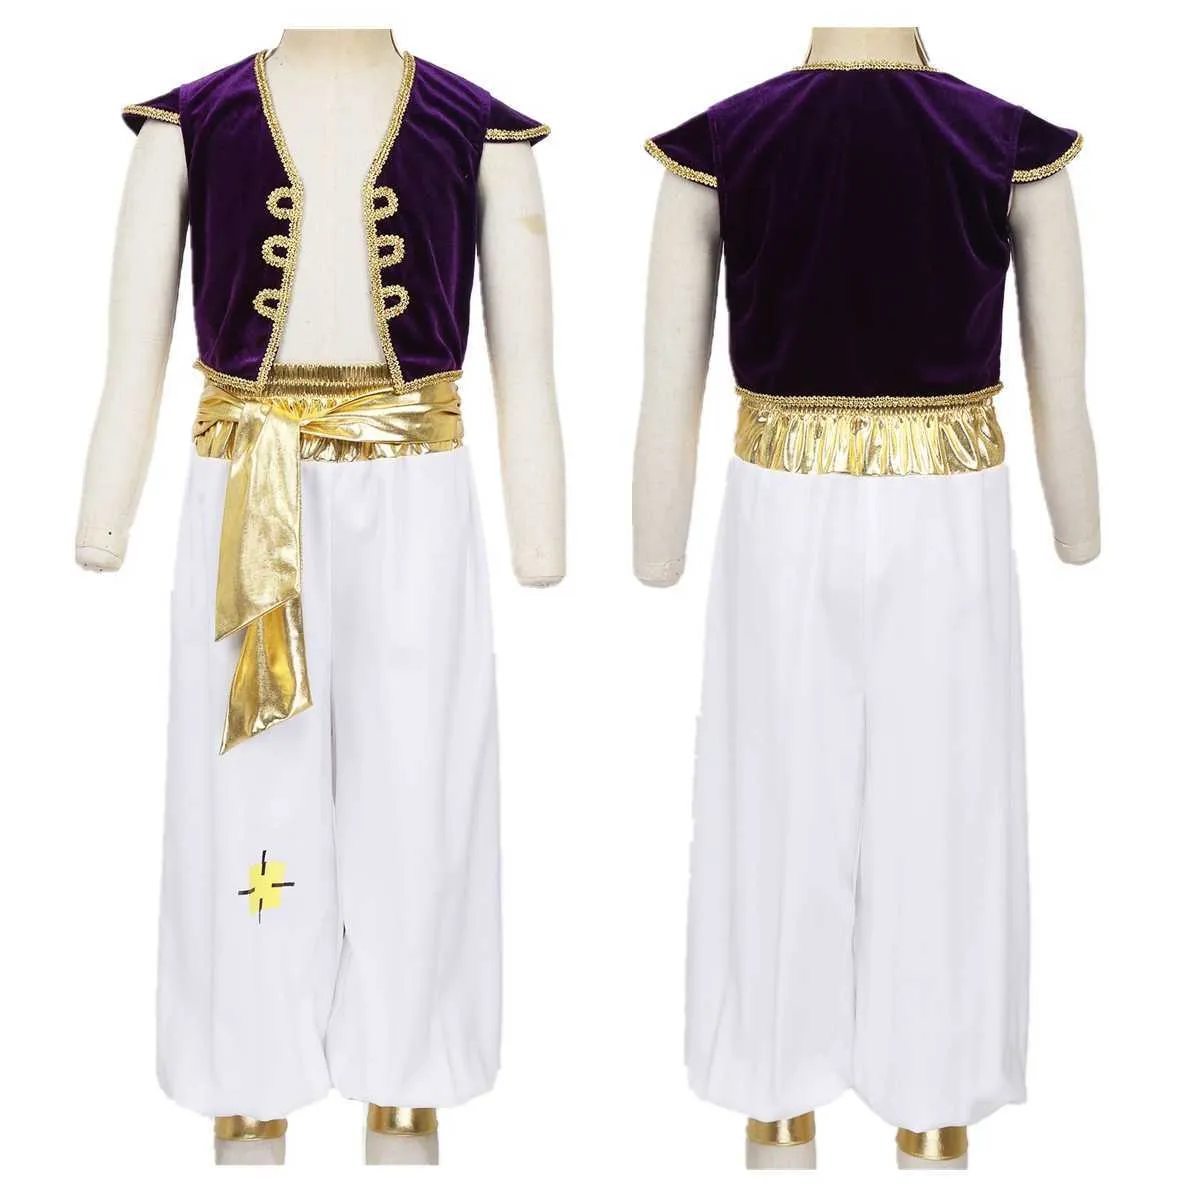 Kids Boys Fancy Arabian Prince Costumes Cap Sleeves Waistcoat with Pants for Halloween Cosplay Fairy Parties Dress Up Q0910